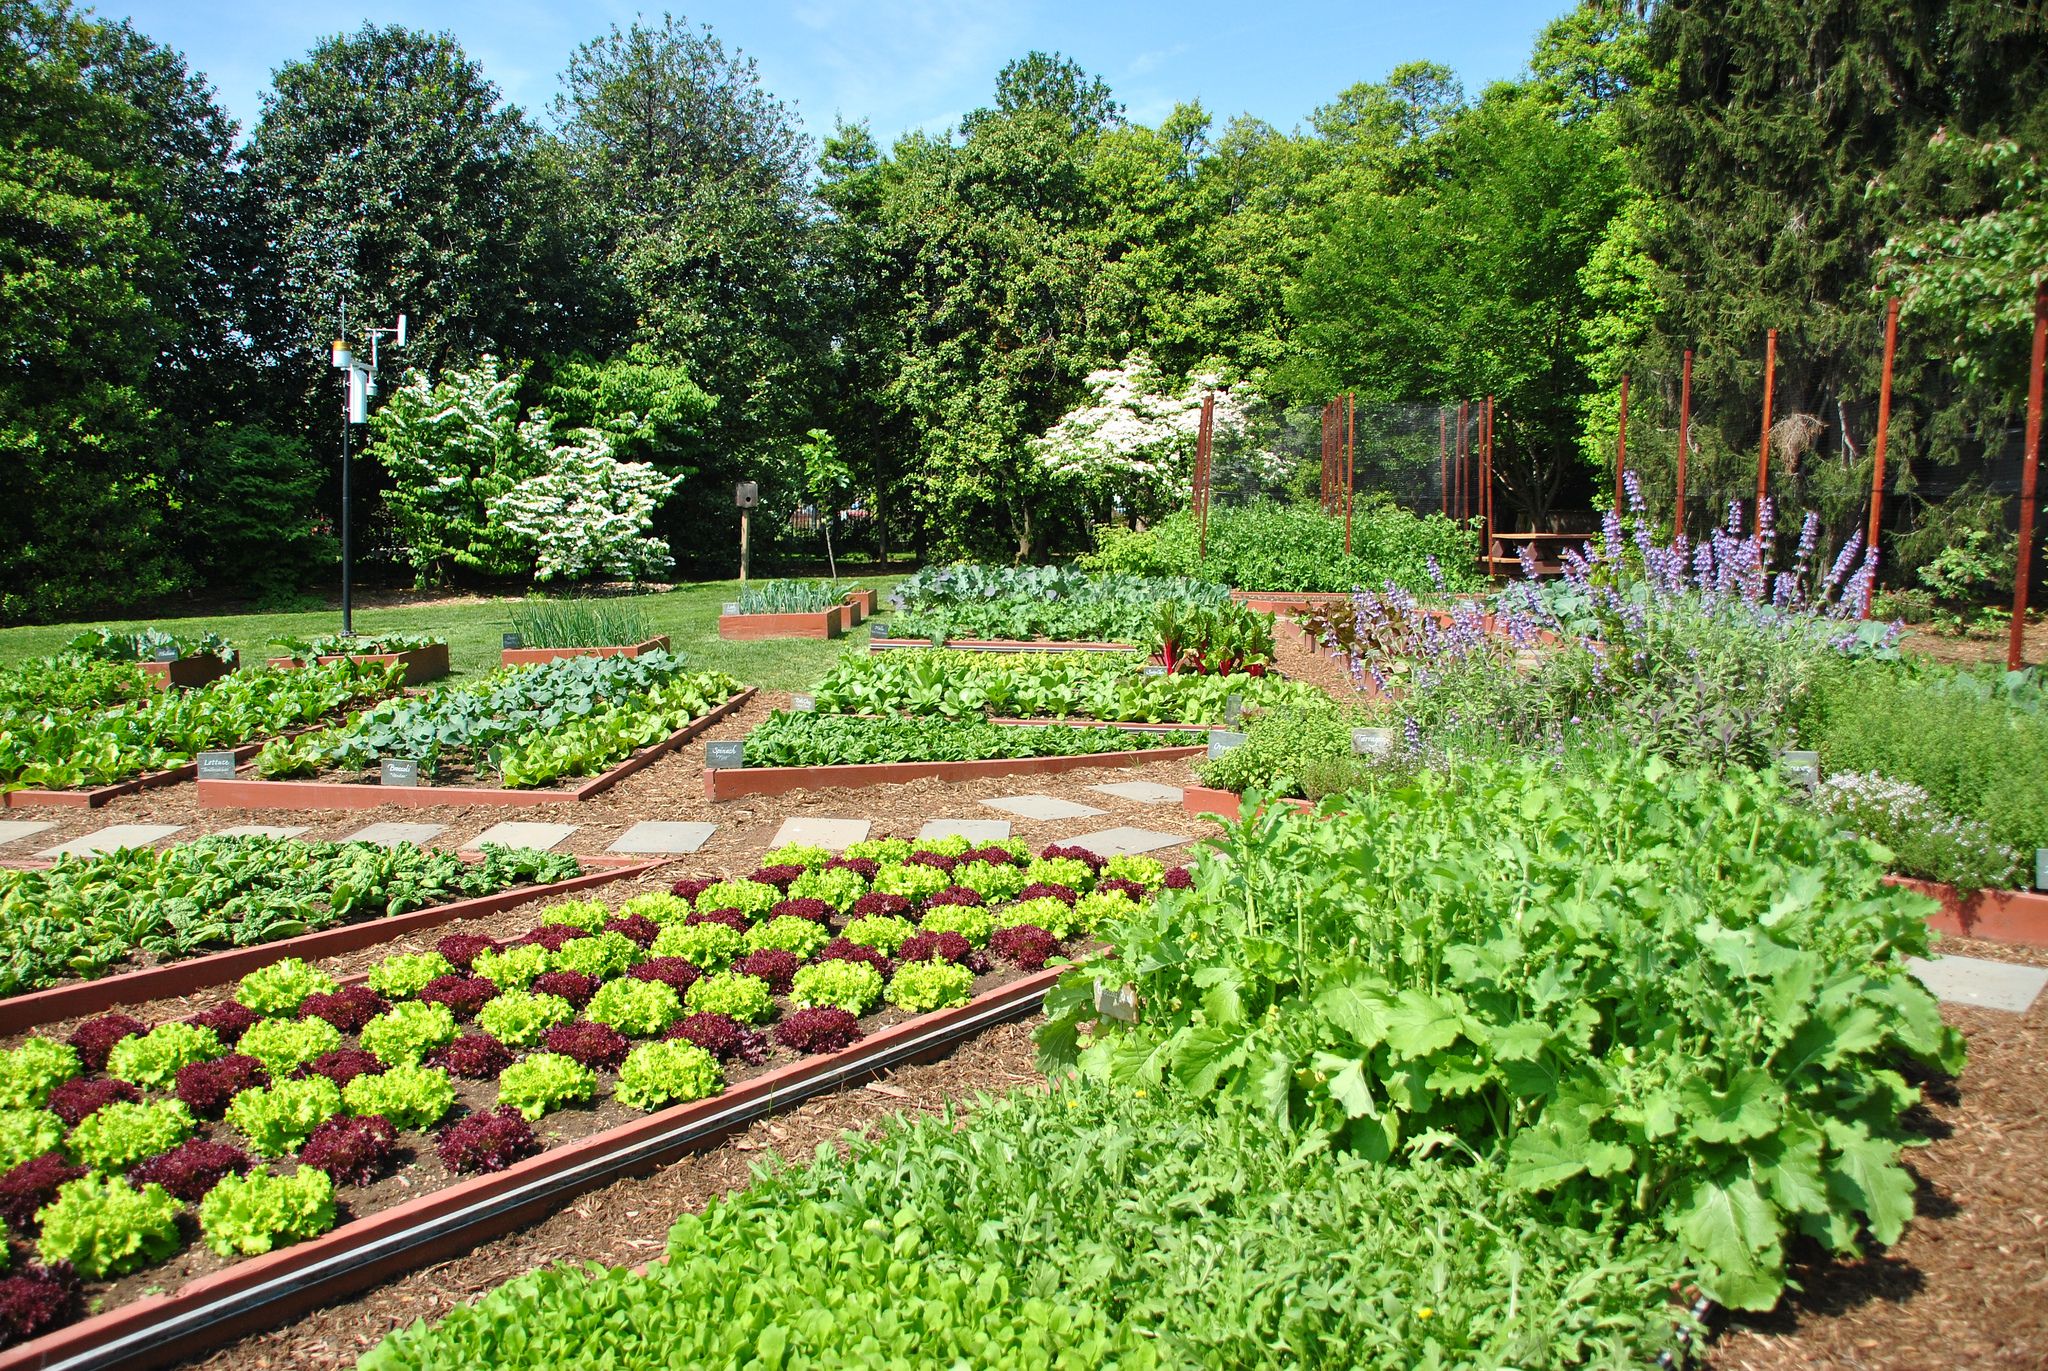 What Are Some Benefits Related To Urban Gardening